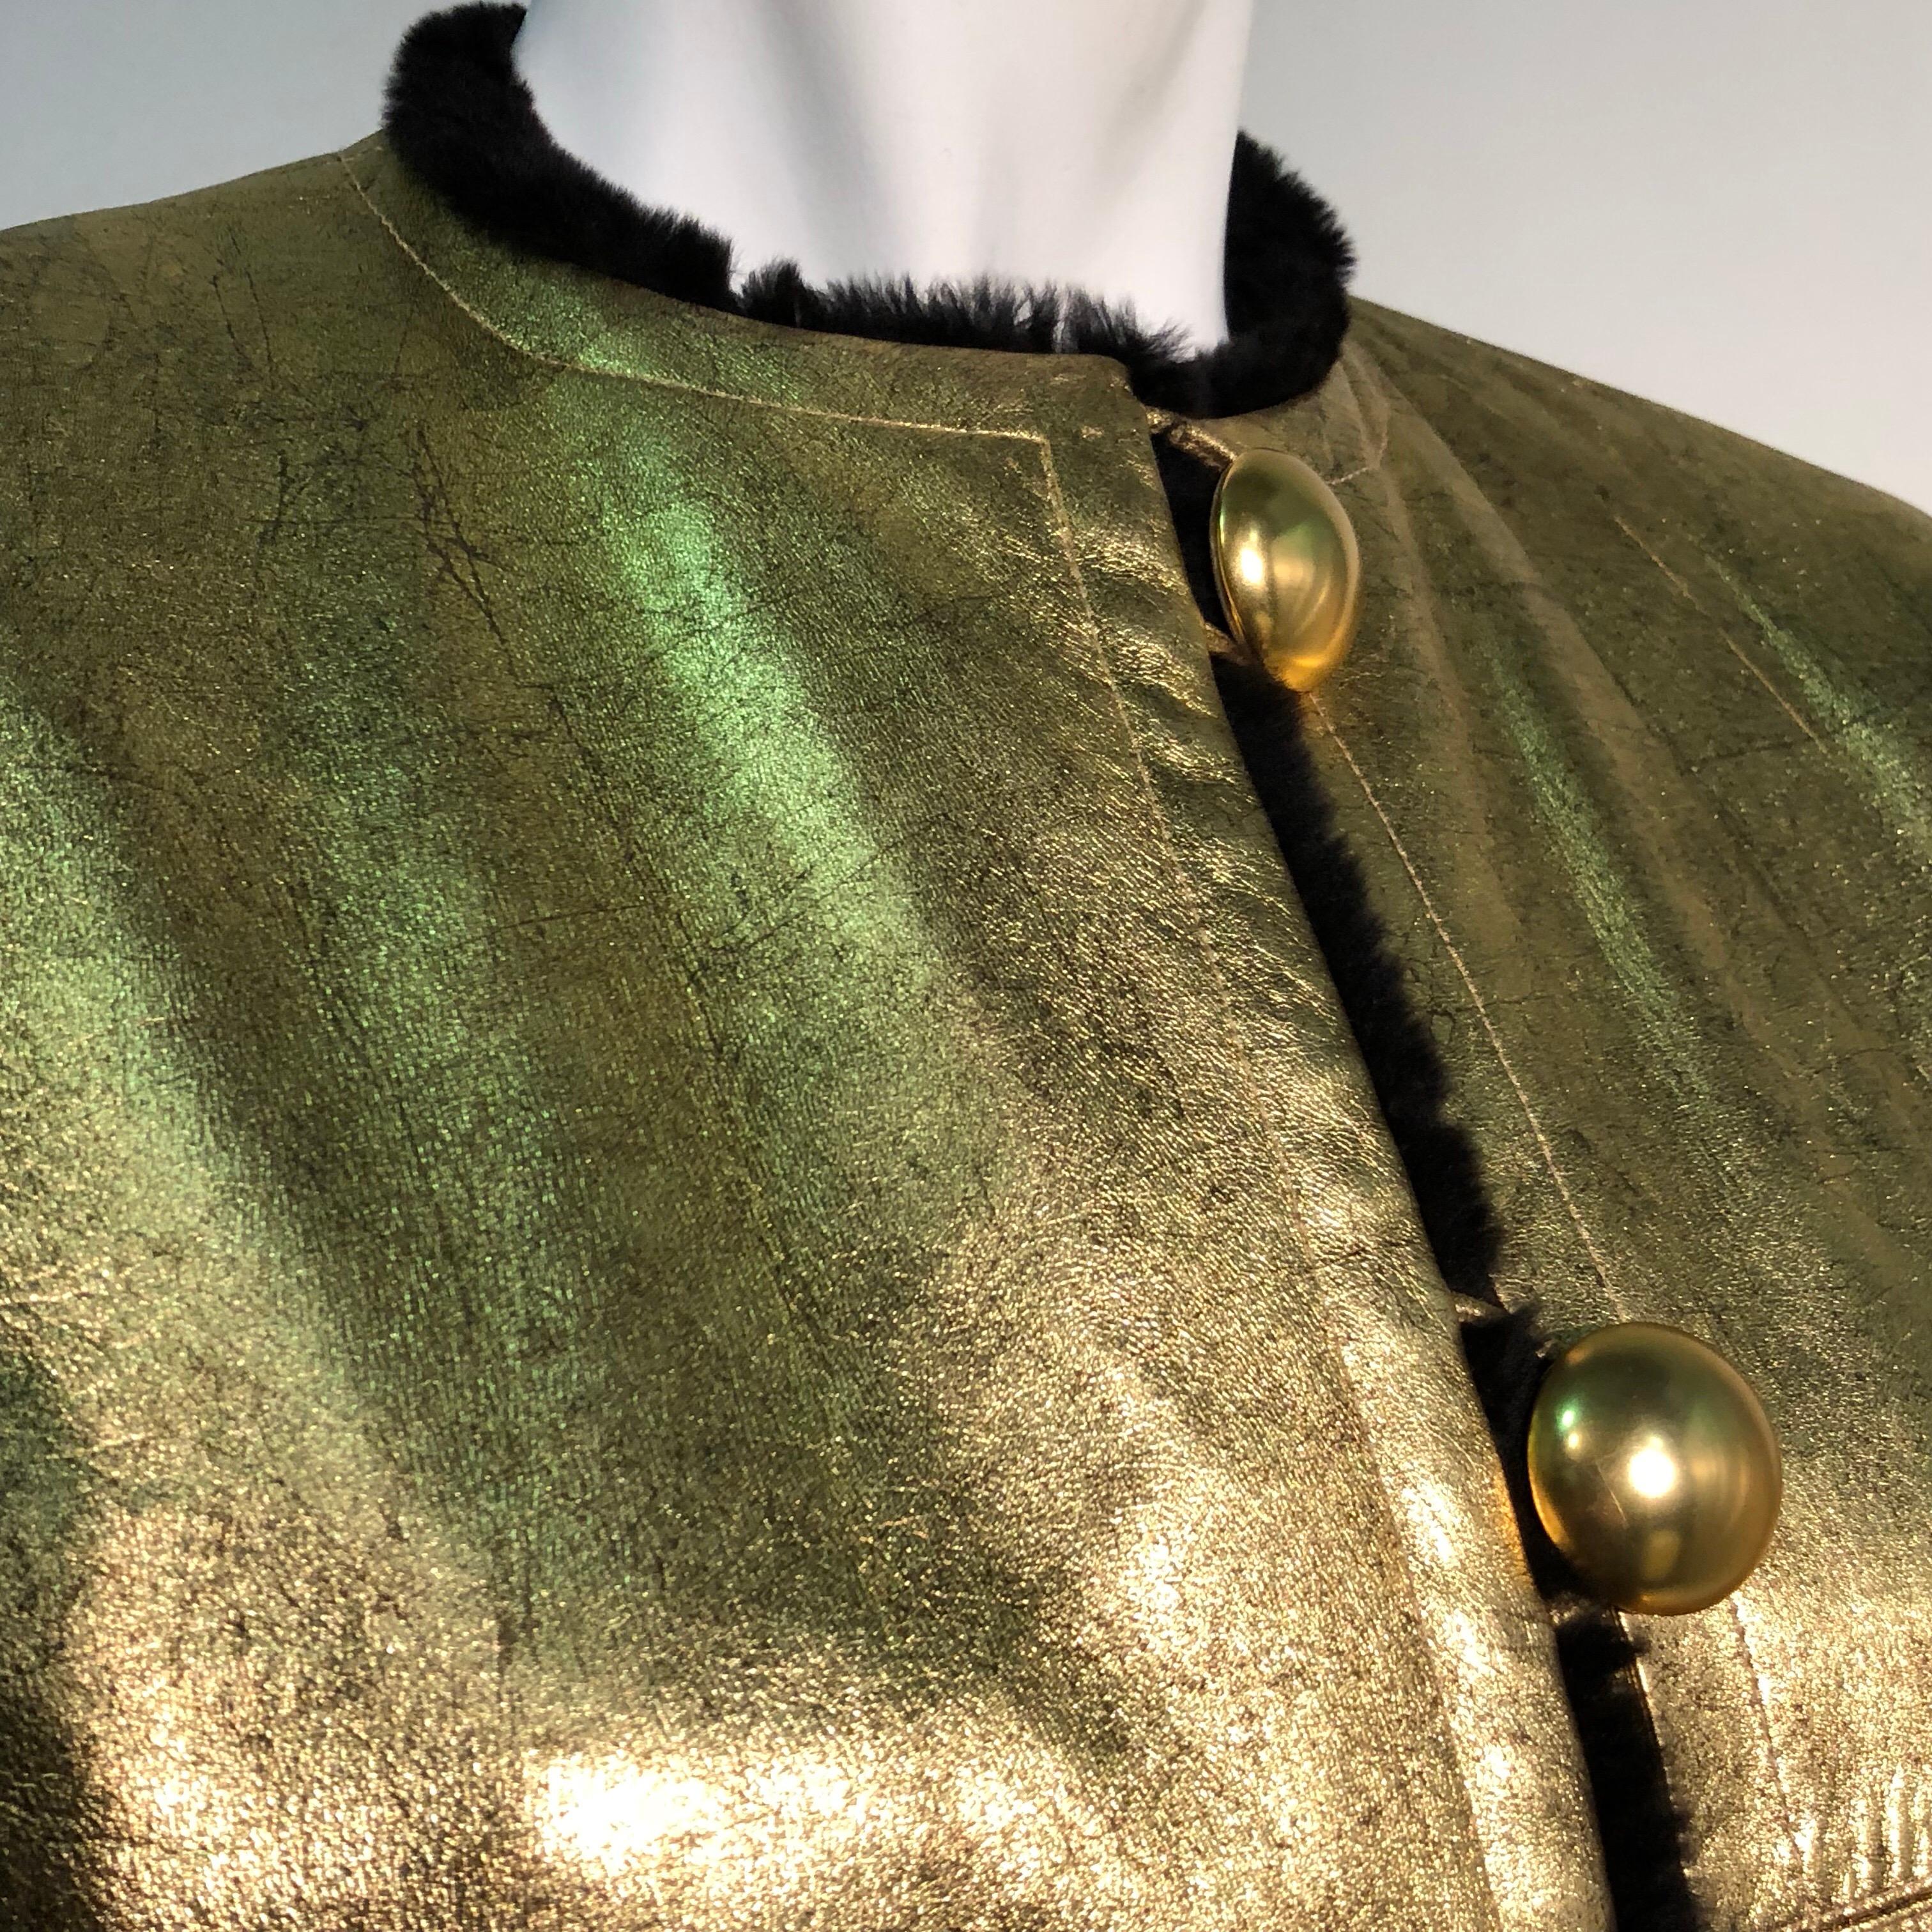 A 1980s Yves Saint Laurent gold leather coat with a luxurious black sheared fur lining. Collar-less with large gold-tone dome topped buttons down front. Structured padded shoulders. A rare beauty and one-of-a-kind special order of it’s time.
.
Size